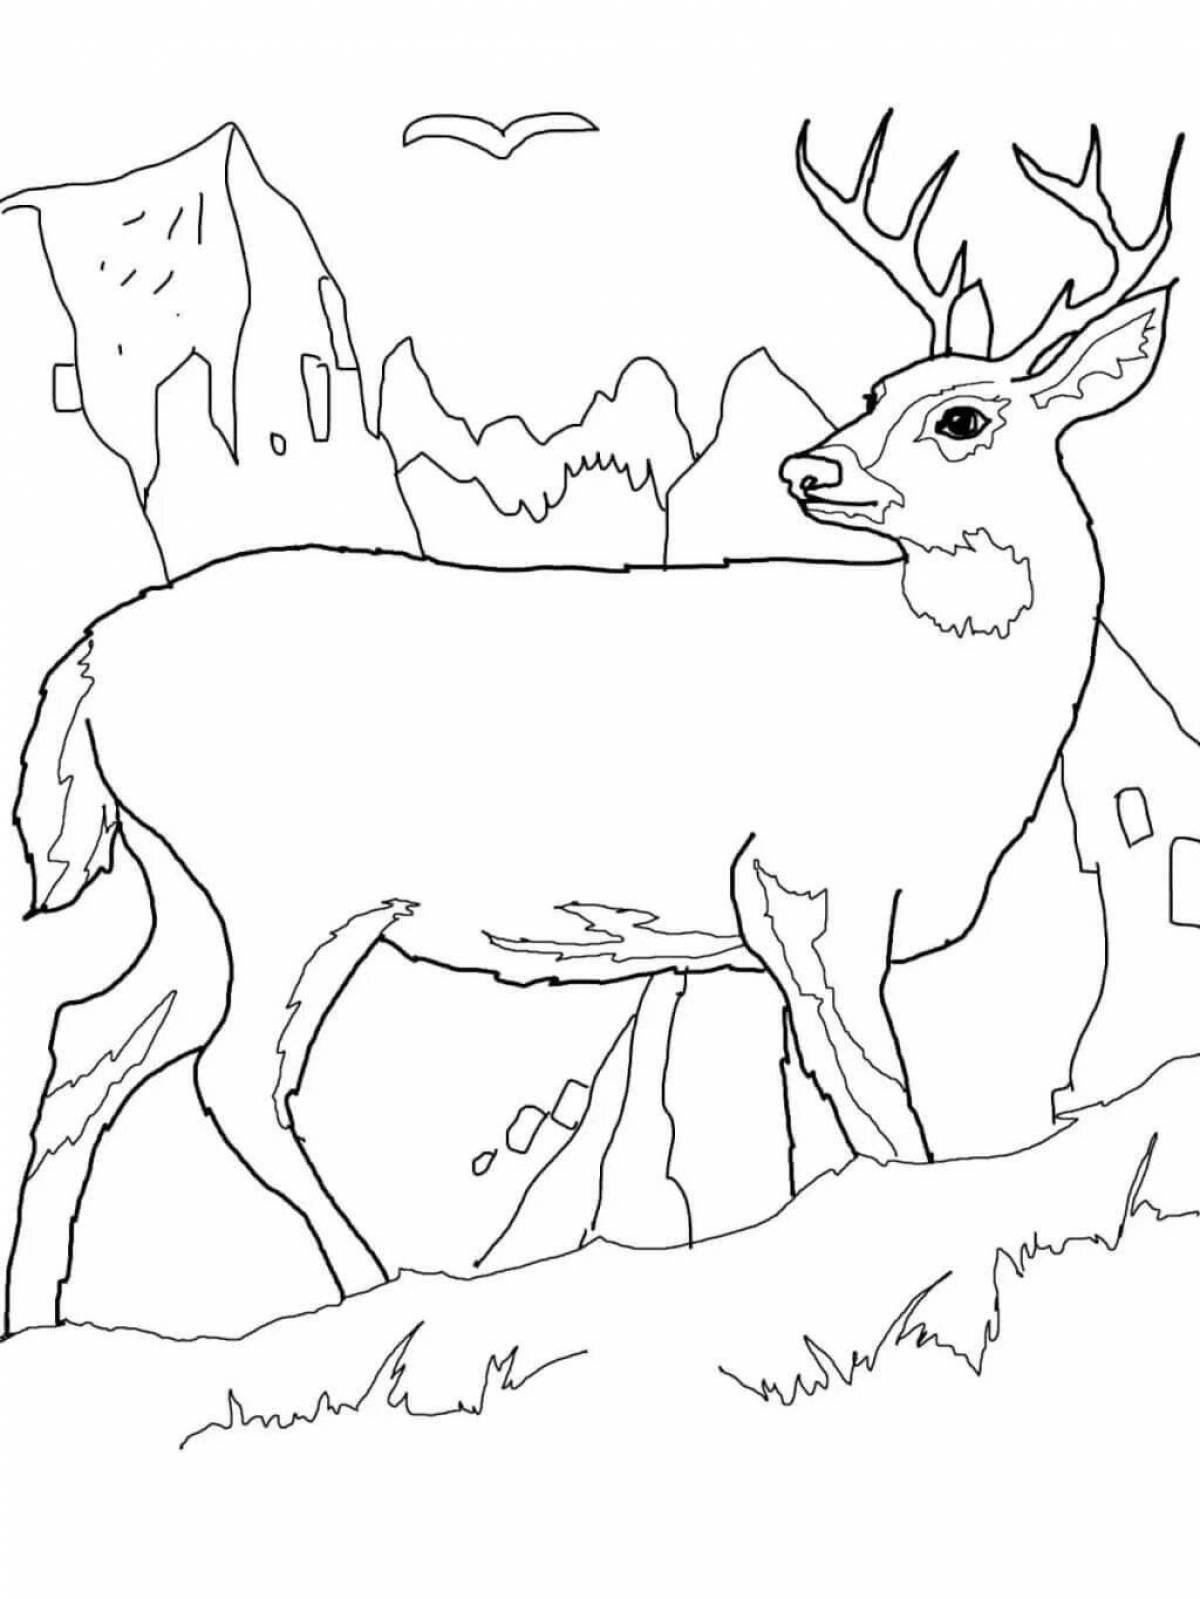 Great northern animal coloring book